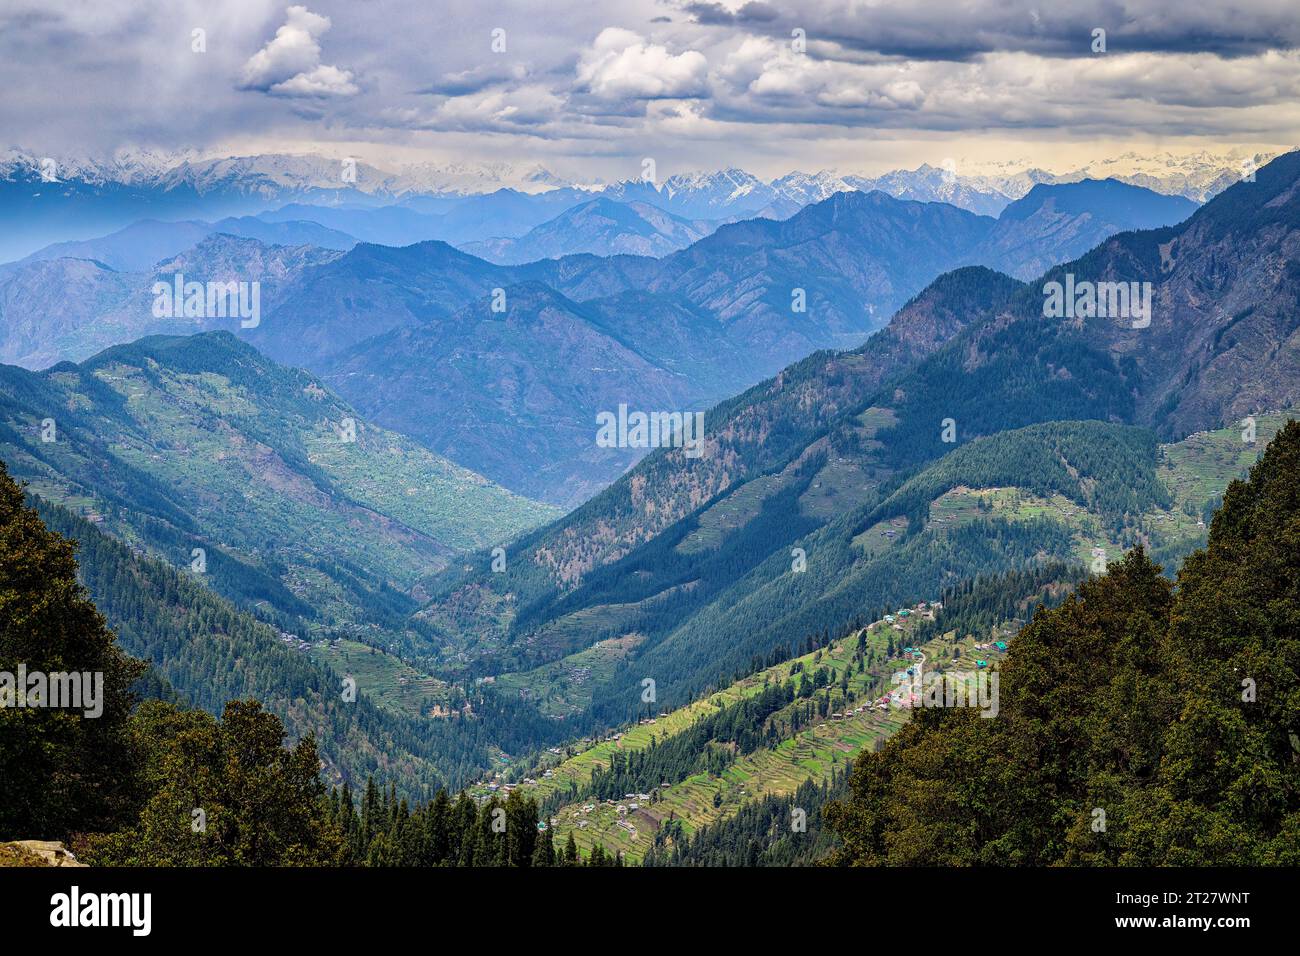 View over the Himalayas from the Panchtara View Point at Jalori pass Stock Photo